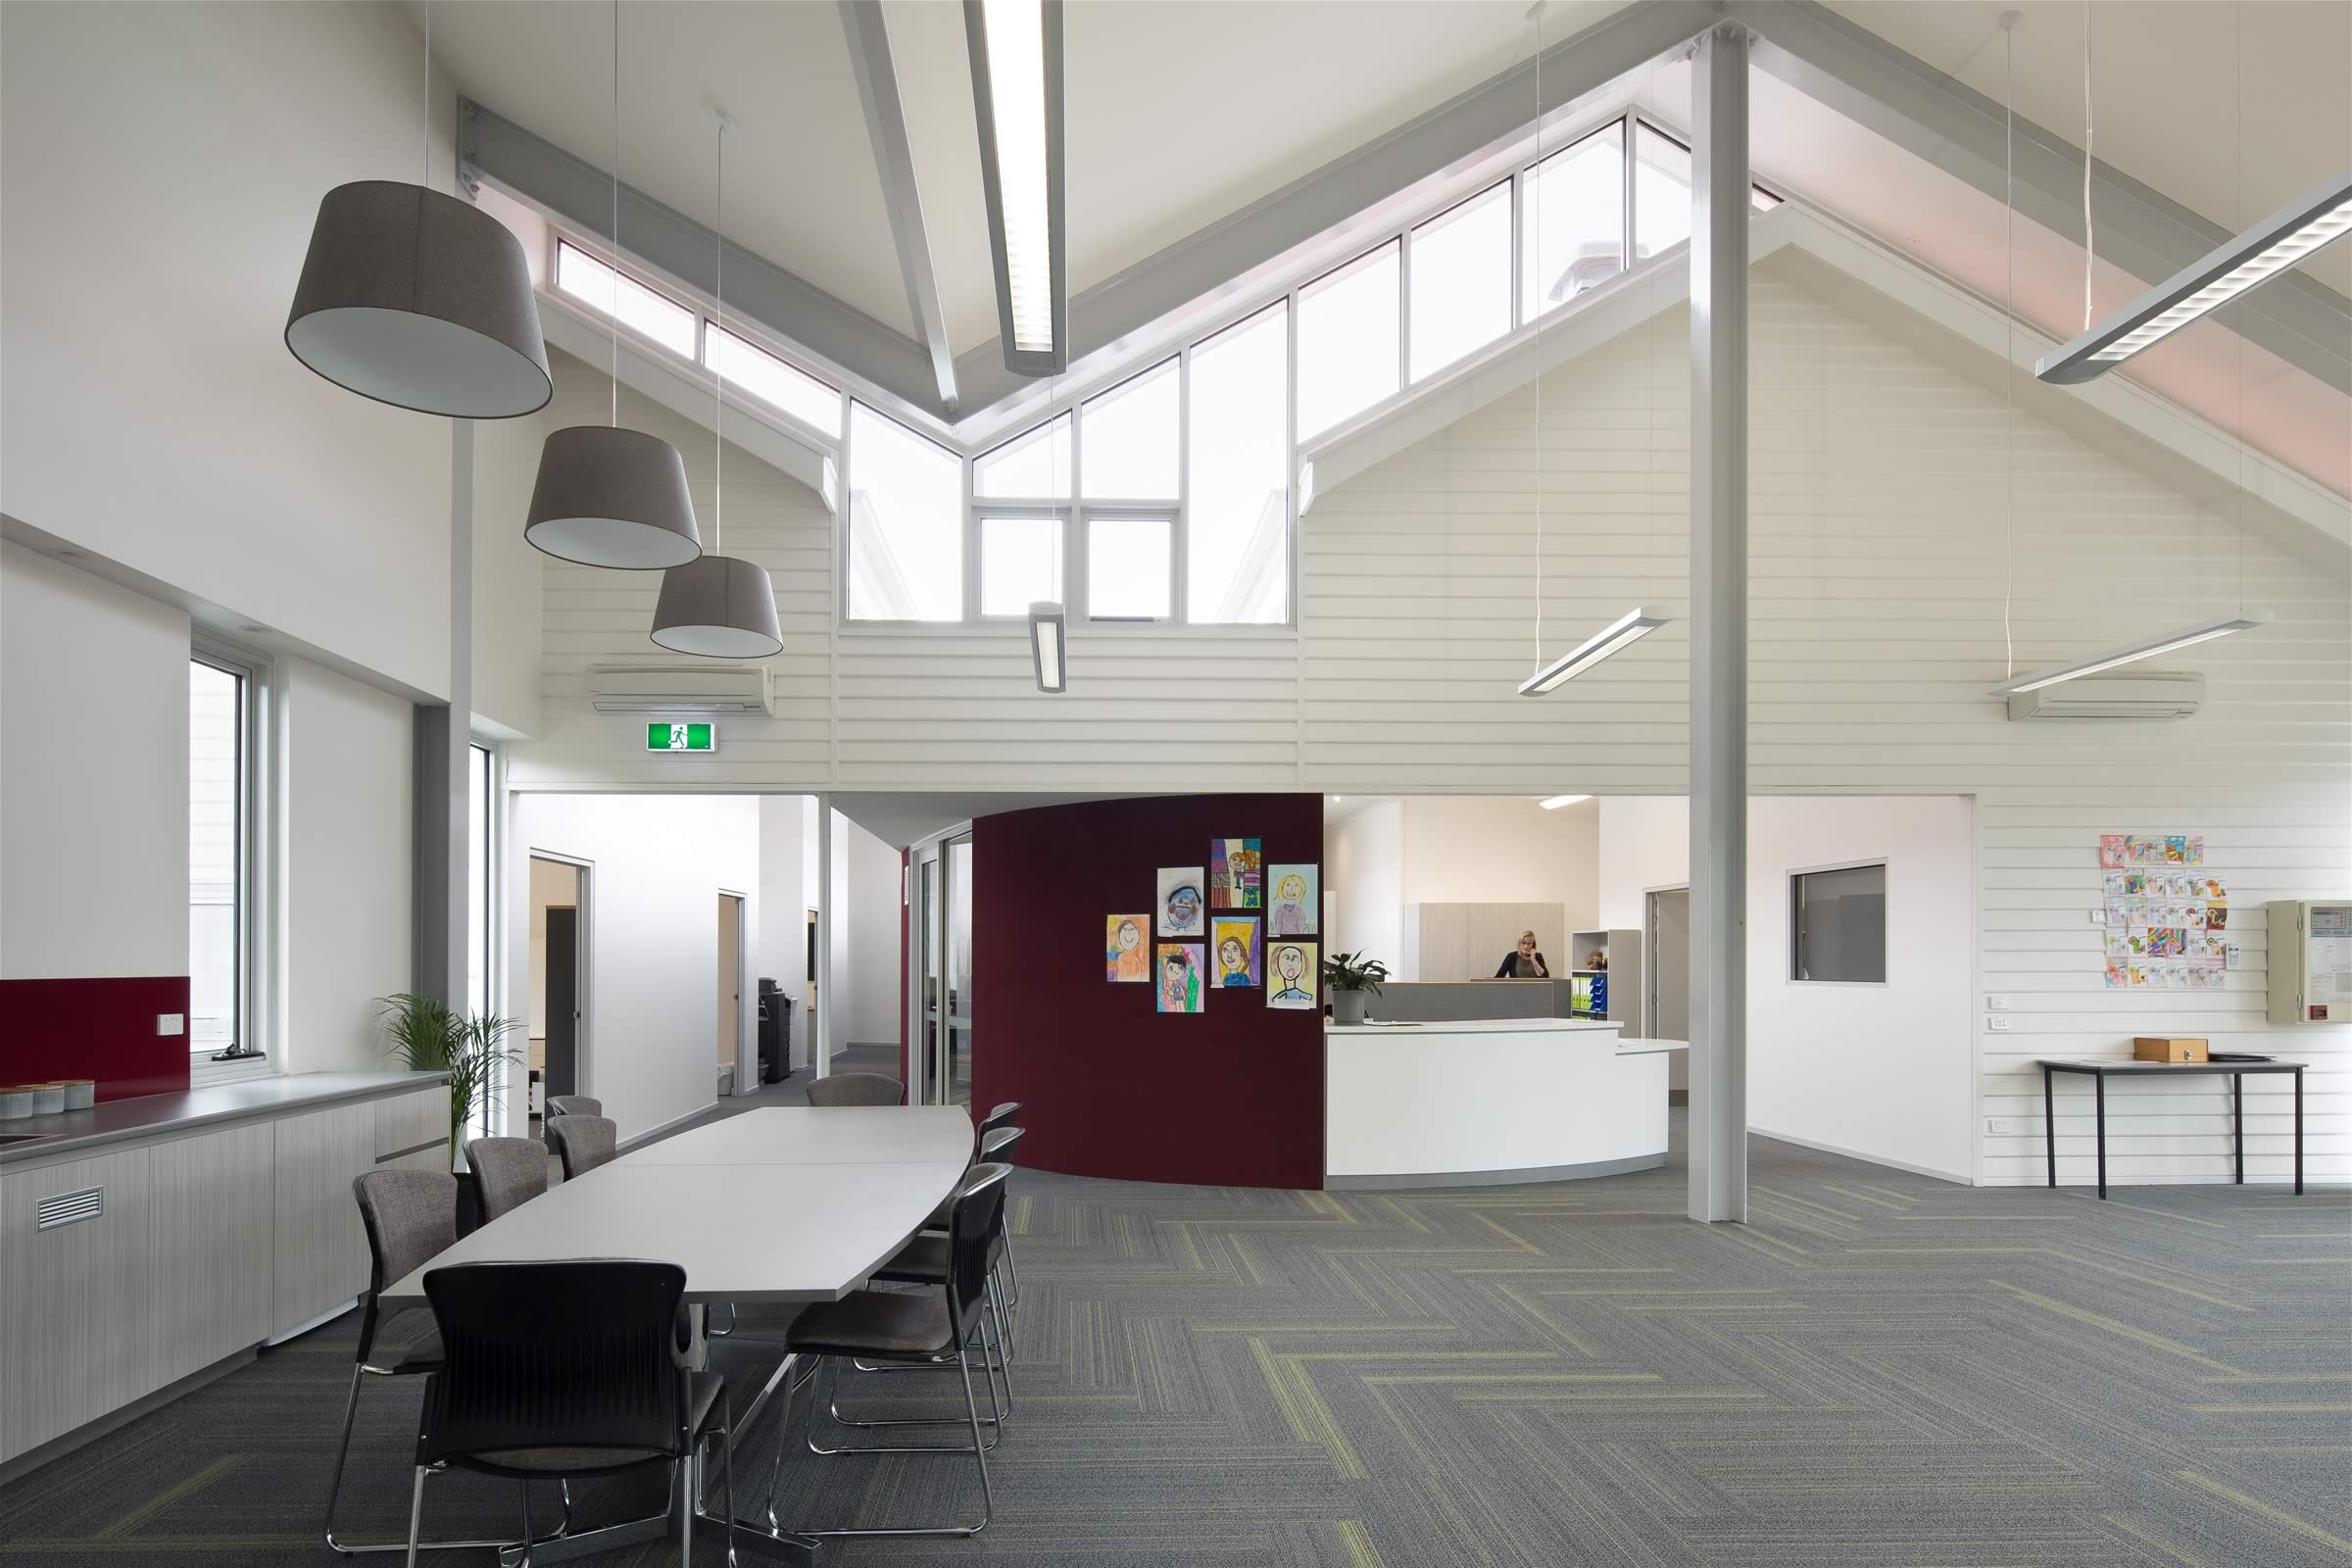 The light, welcoming Glenorchy Primary School administration area reflects our non-institutional, inclusive and respectful design approach, and establishes a sense of community worth and pride. Photo by Thomas Ryan.